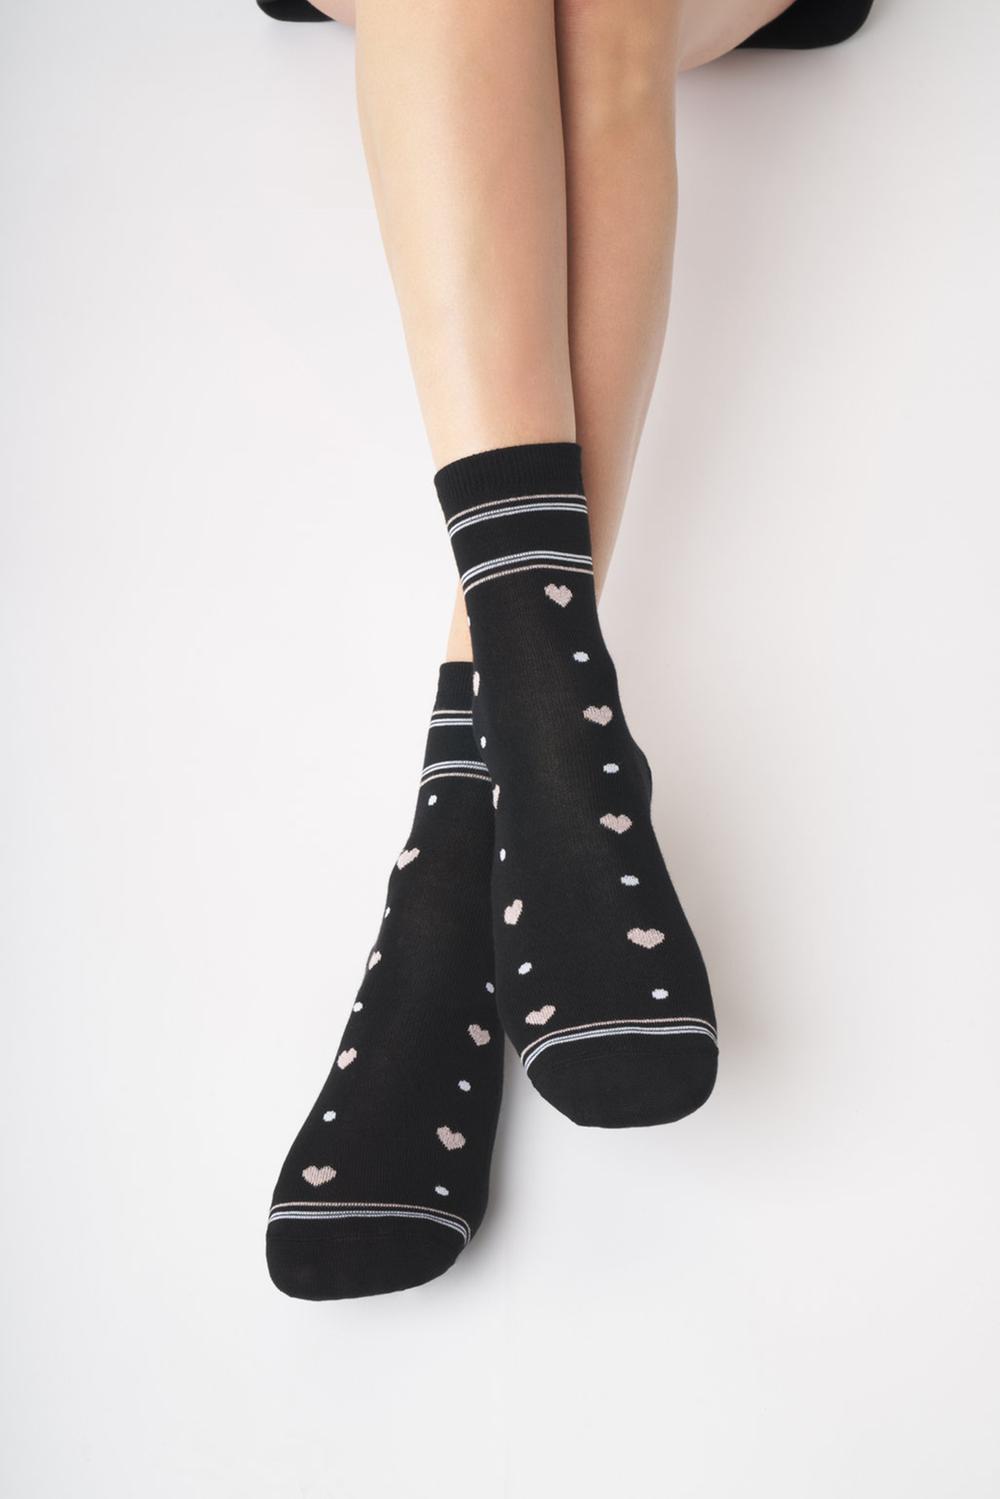 SiSi Cuori Calzino - Soft black cotton fashion ankle socks with white and sparkly gold lurex hearts and spots pattern and striped cuff and toe, shaped heel and flat toe seam.